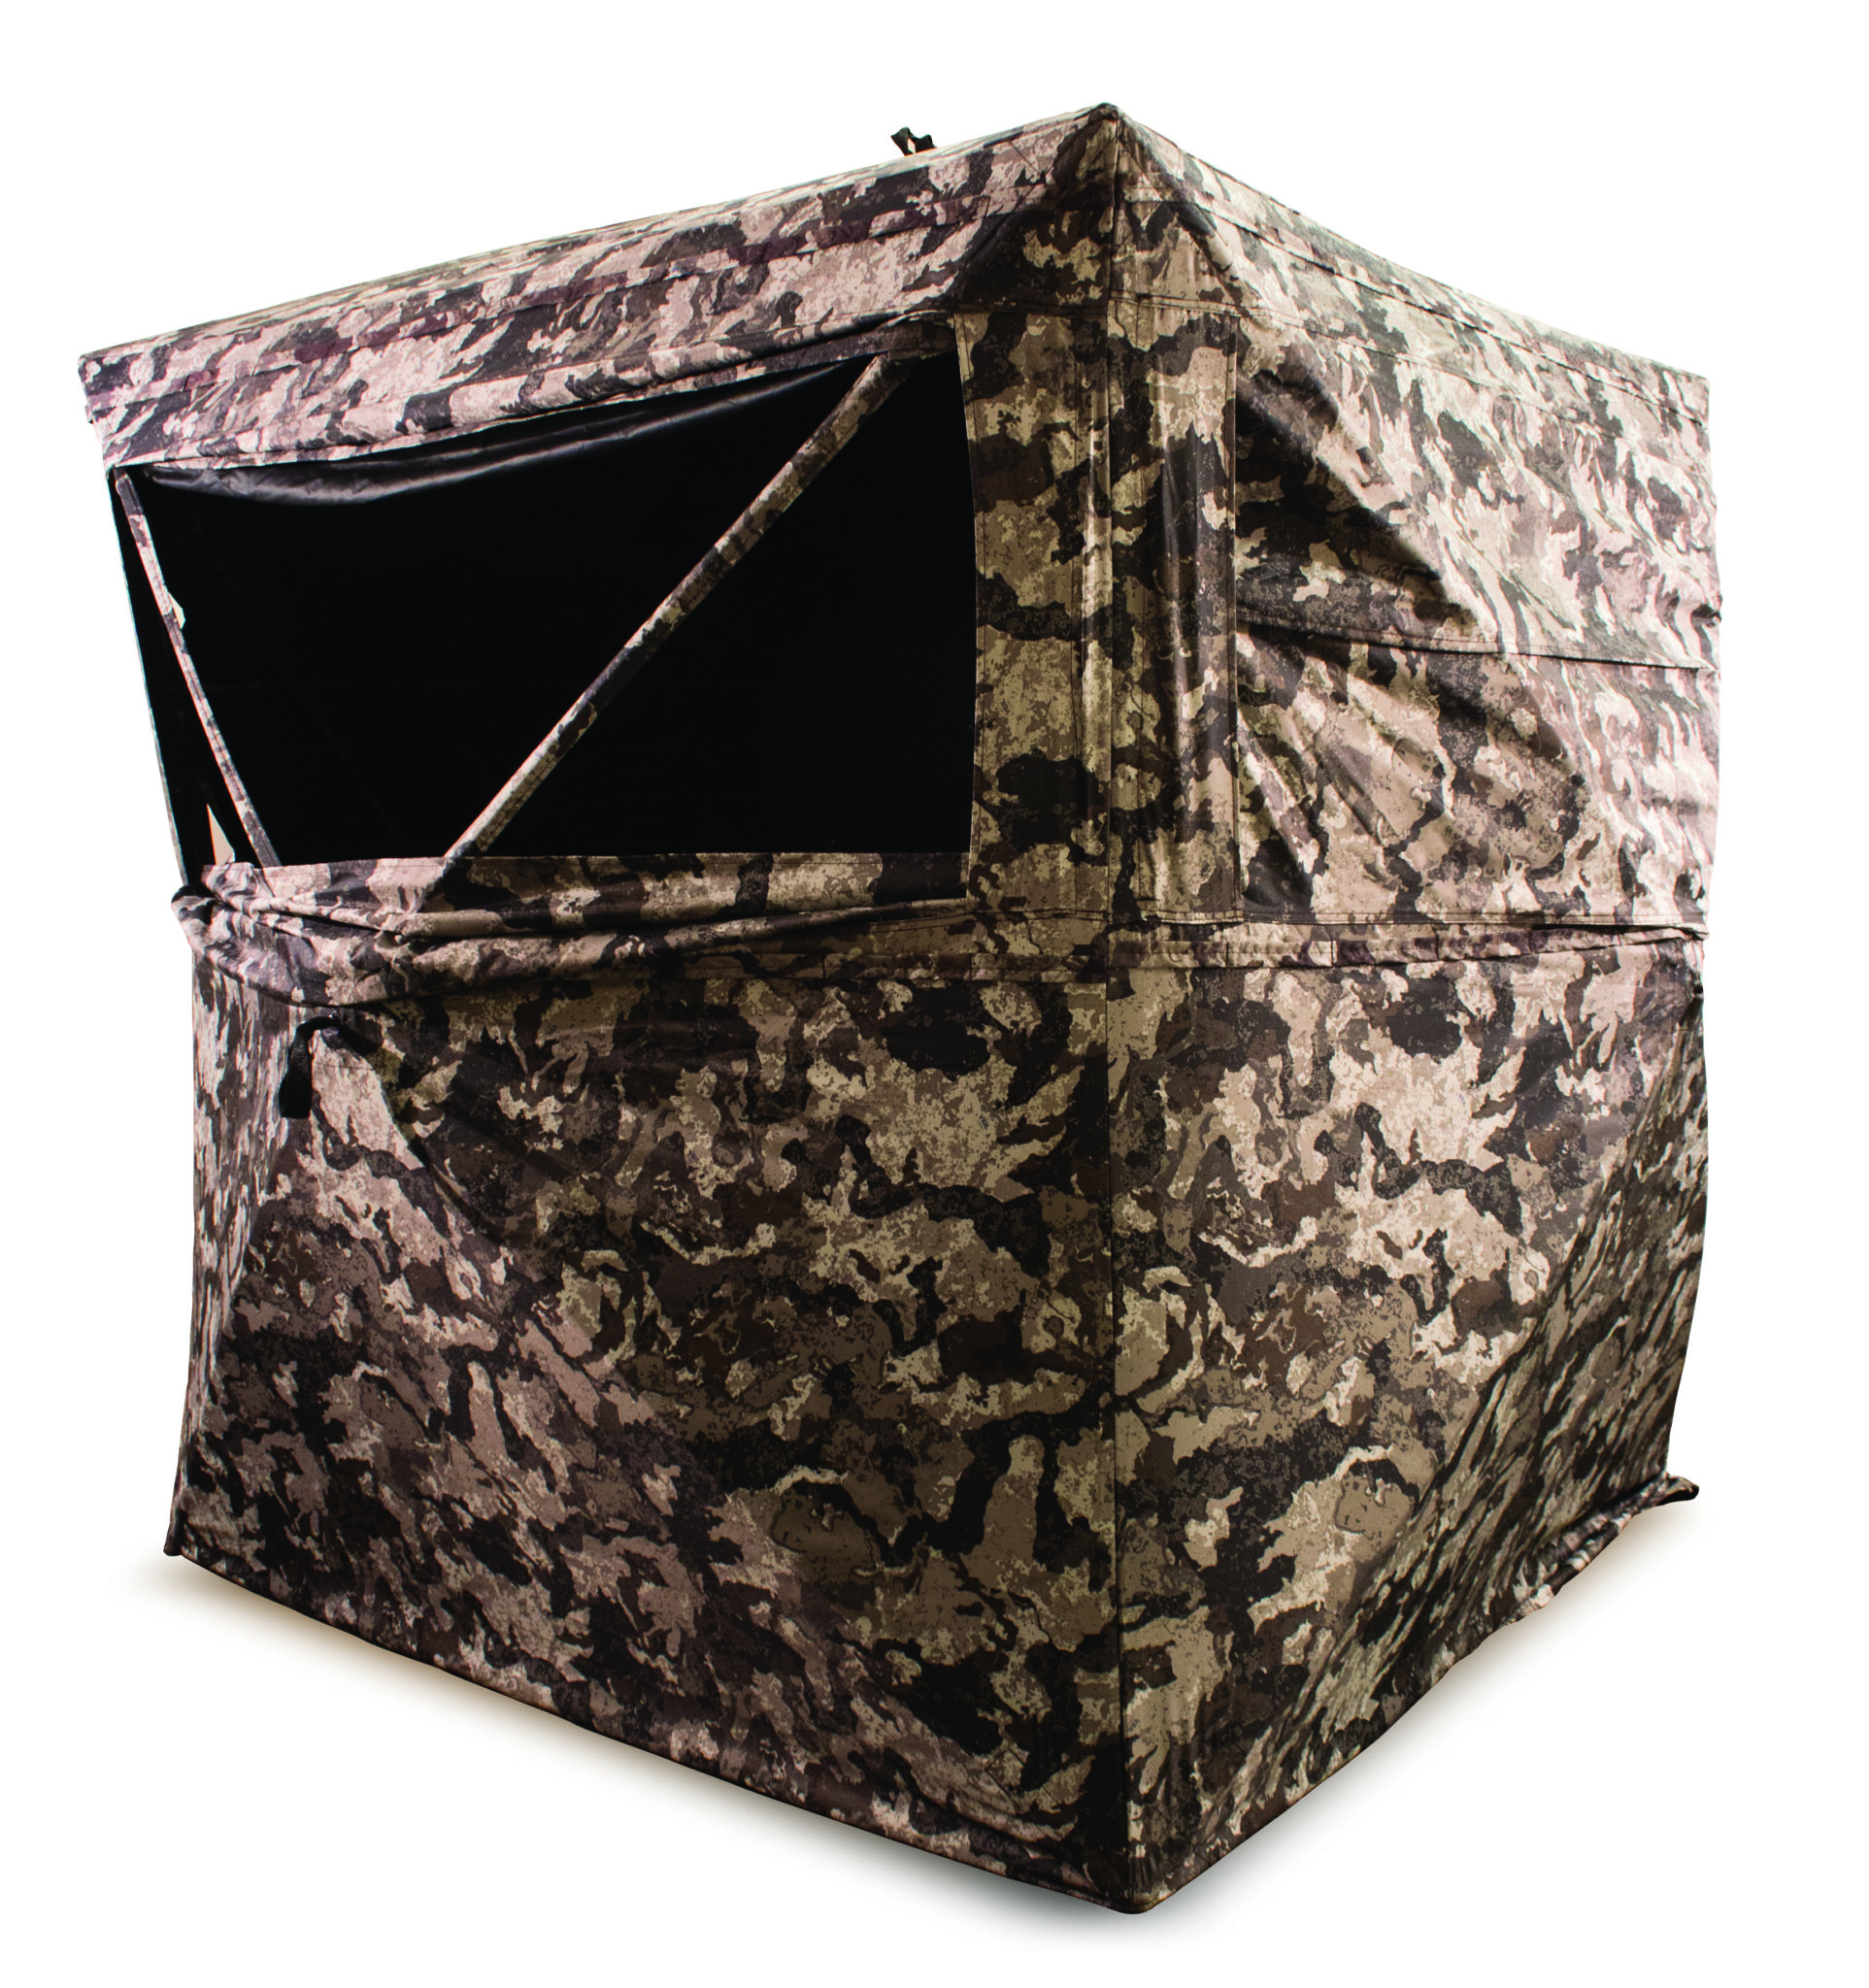 Hme Products HME-SS75 Spring Steel 75 Ground Blind for sale online 